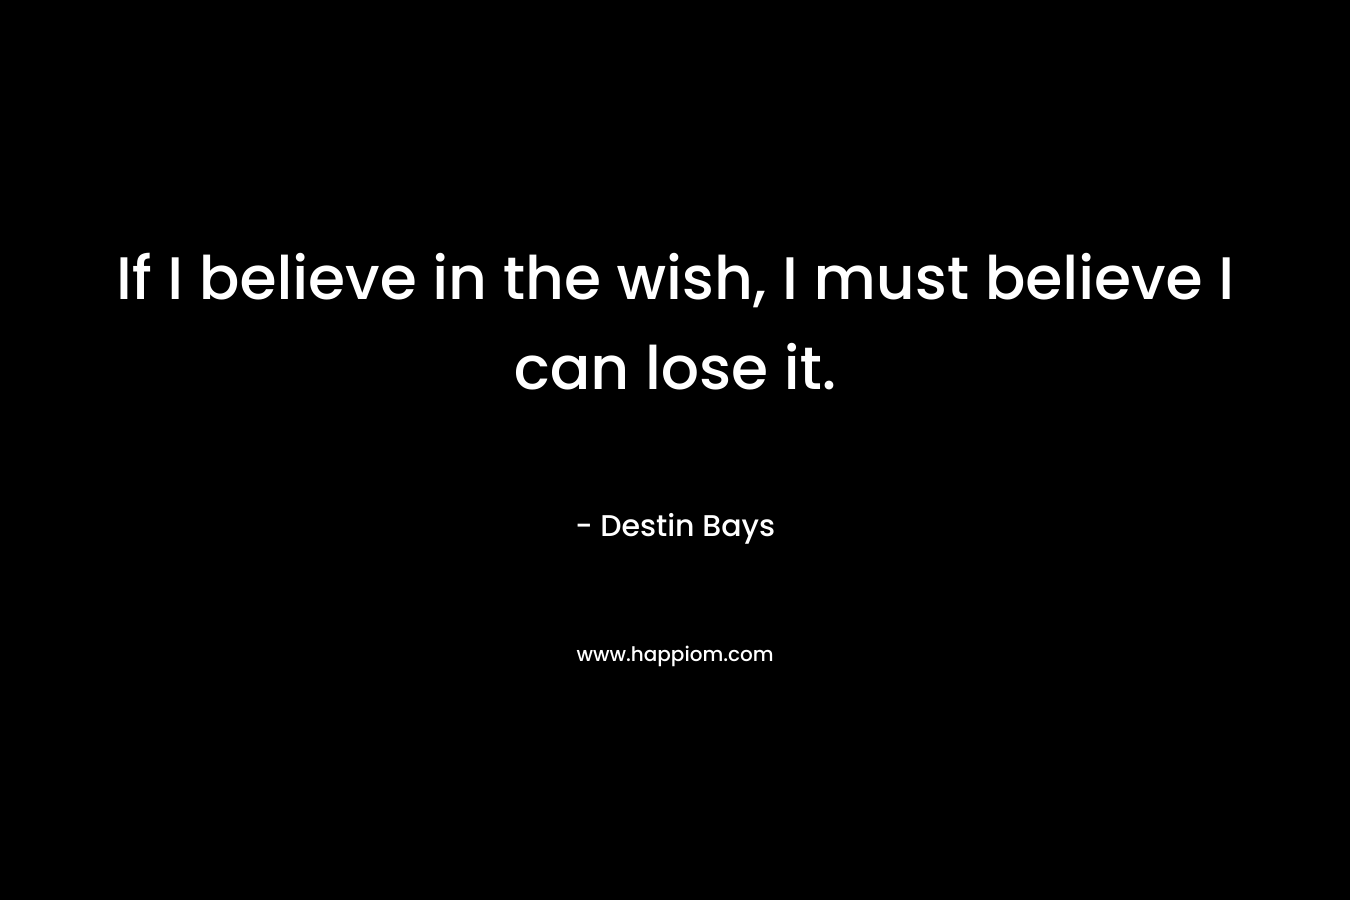 If I believe in the wish, I must believe I can lose it.